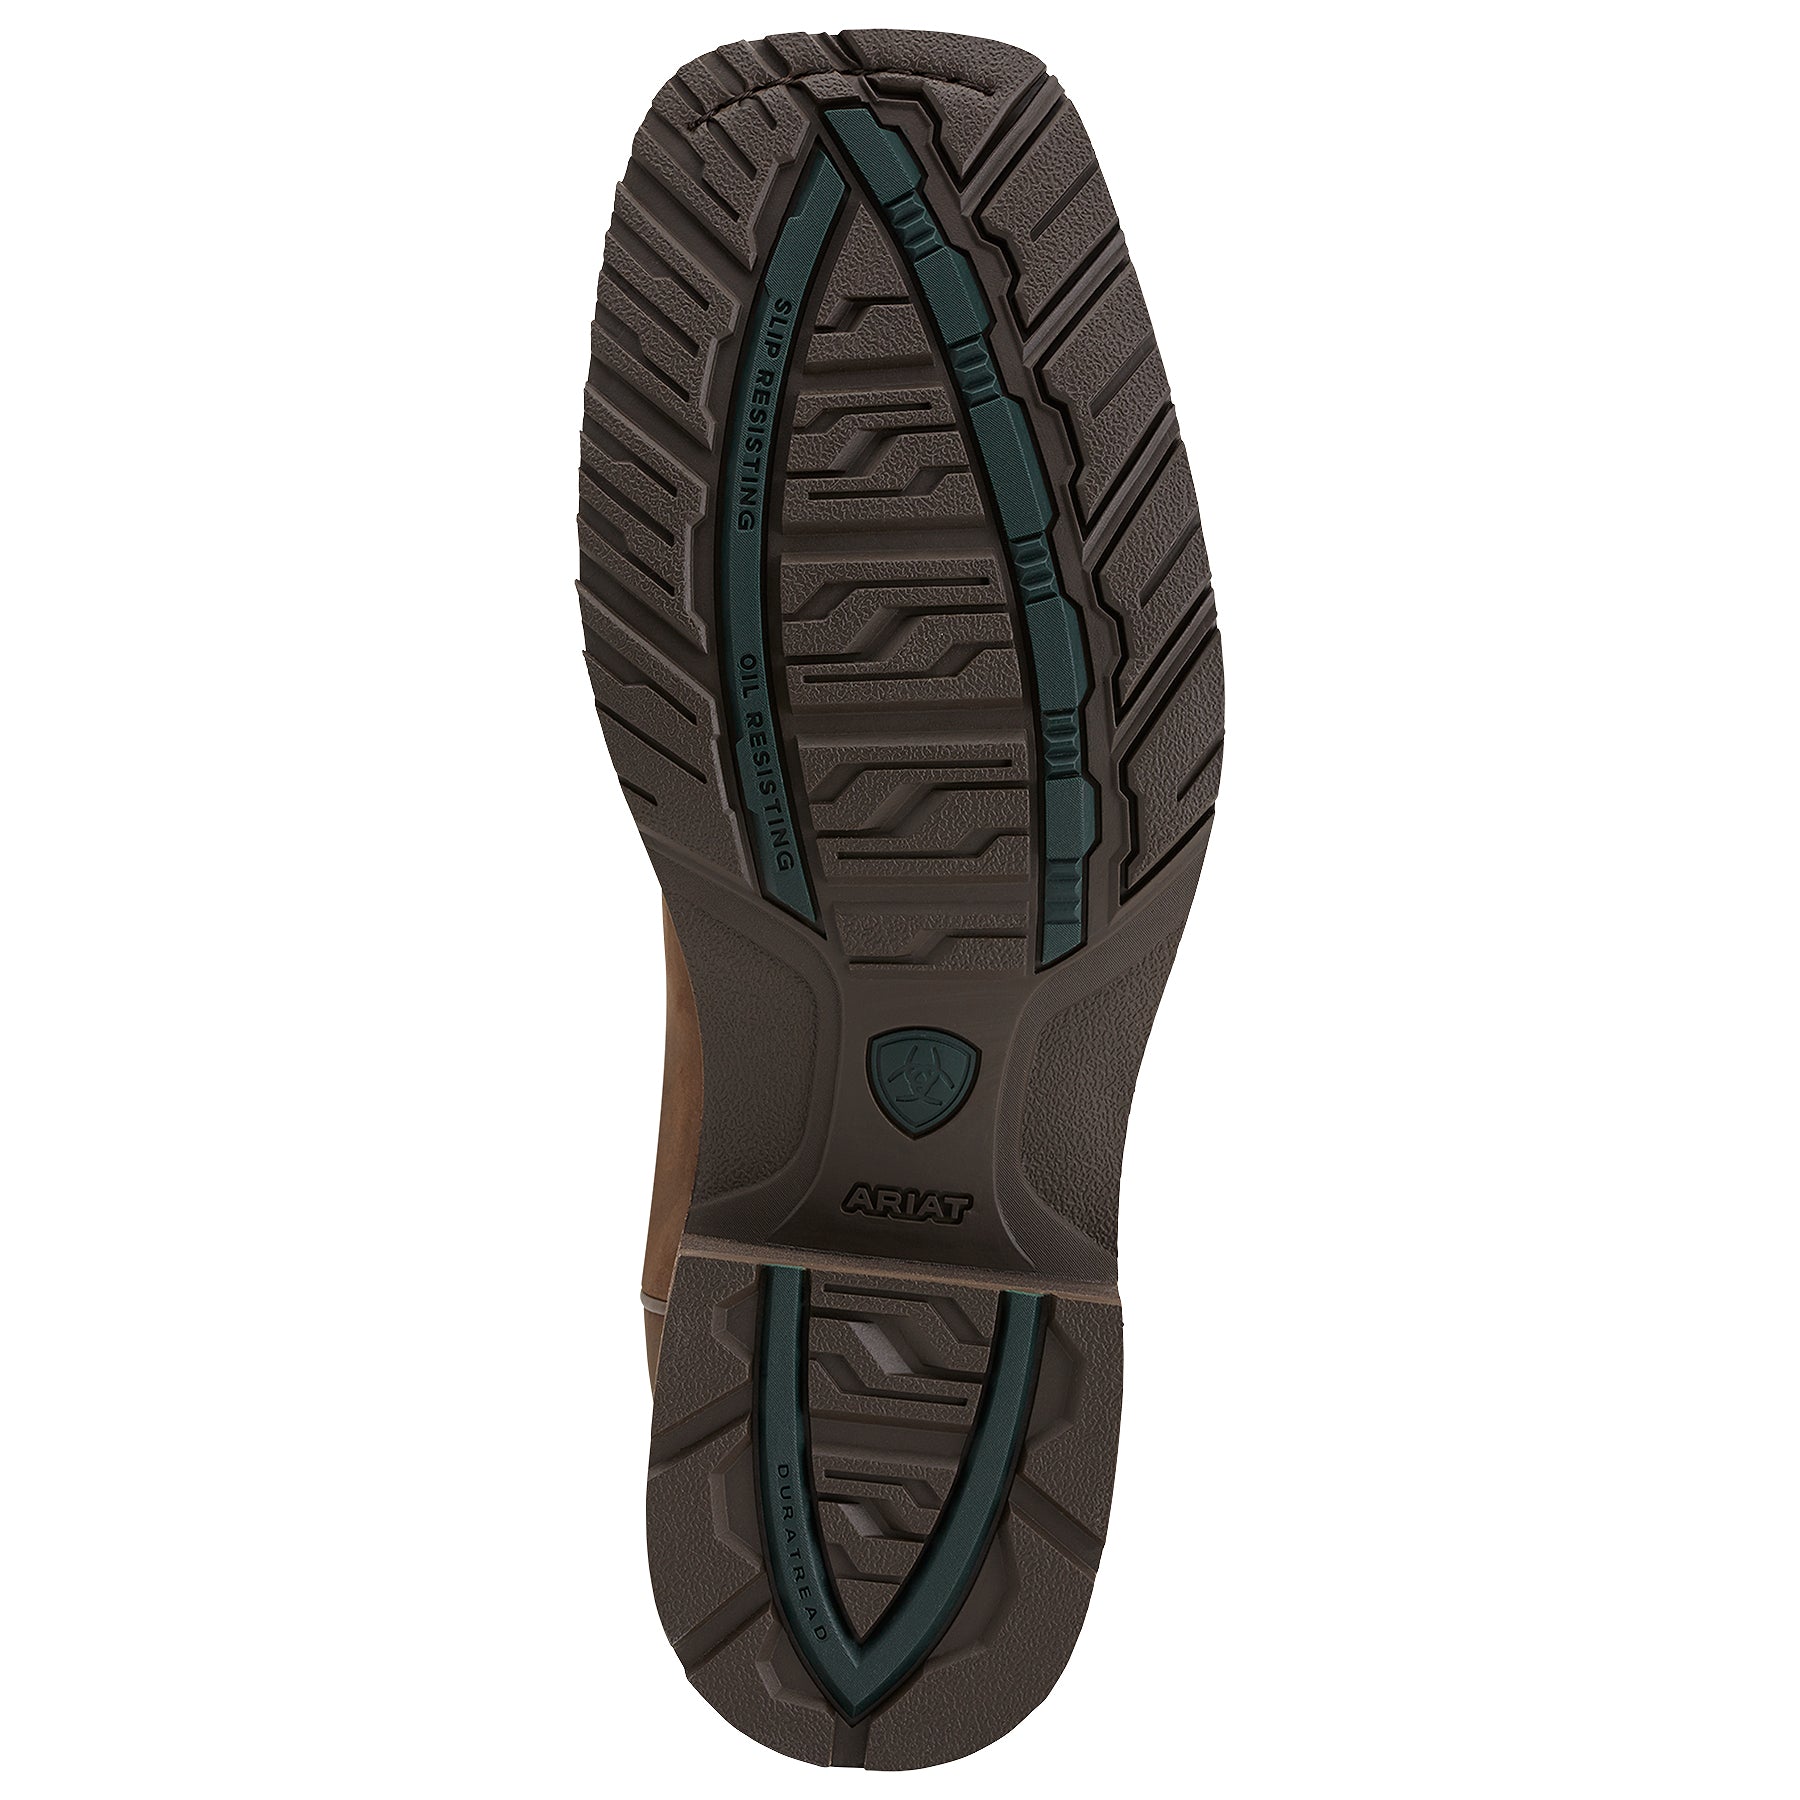 rubber sole of Ariat Hybrid Rancher H20